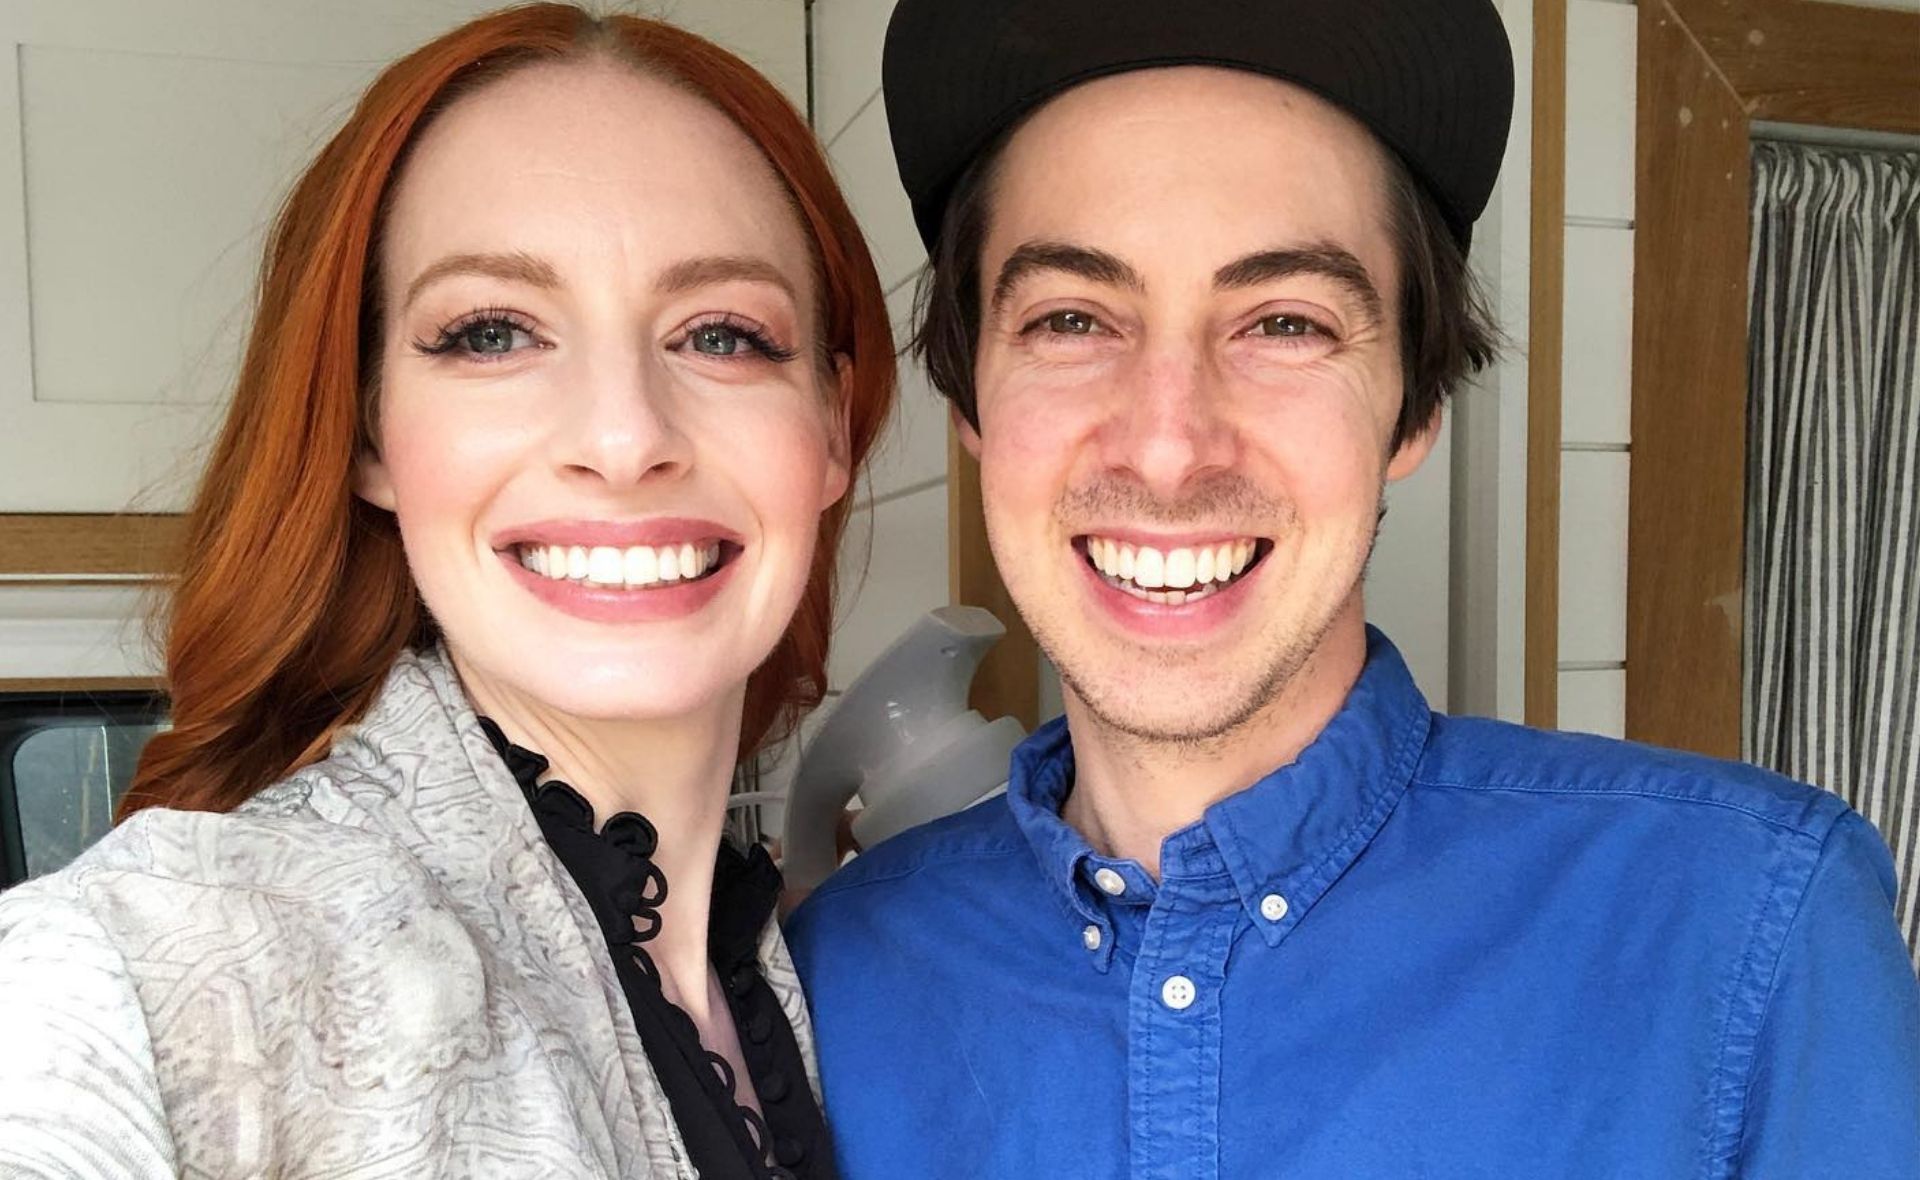 EXCLUSIVE: The wholesome priority that put Emma Watkins and her fiancé’s wedding plans on hold